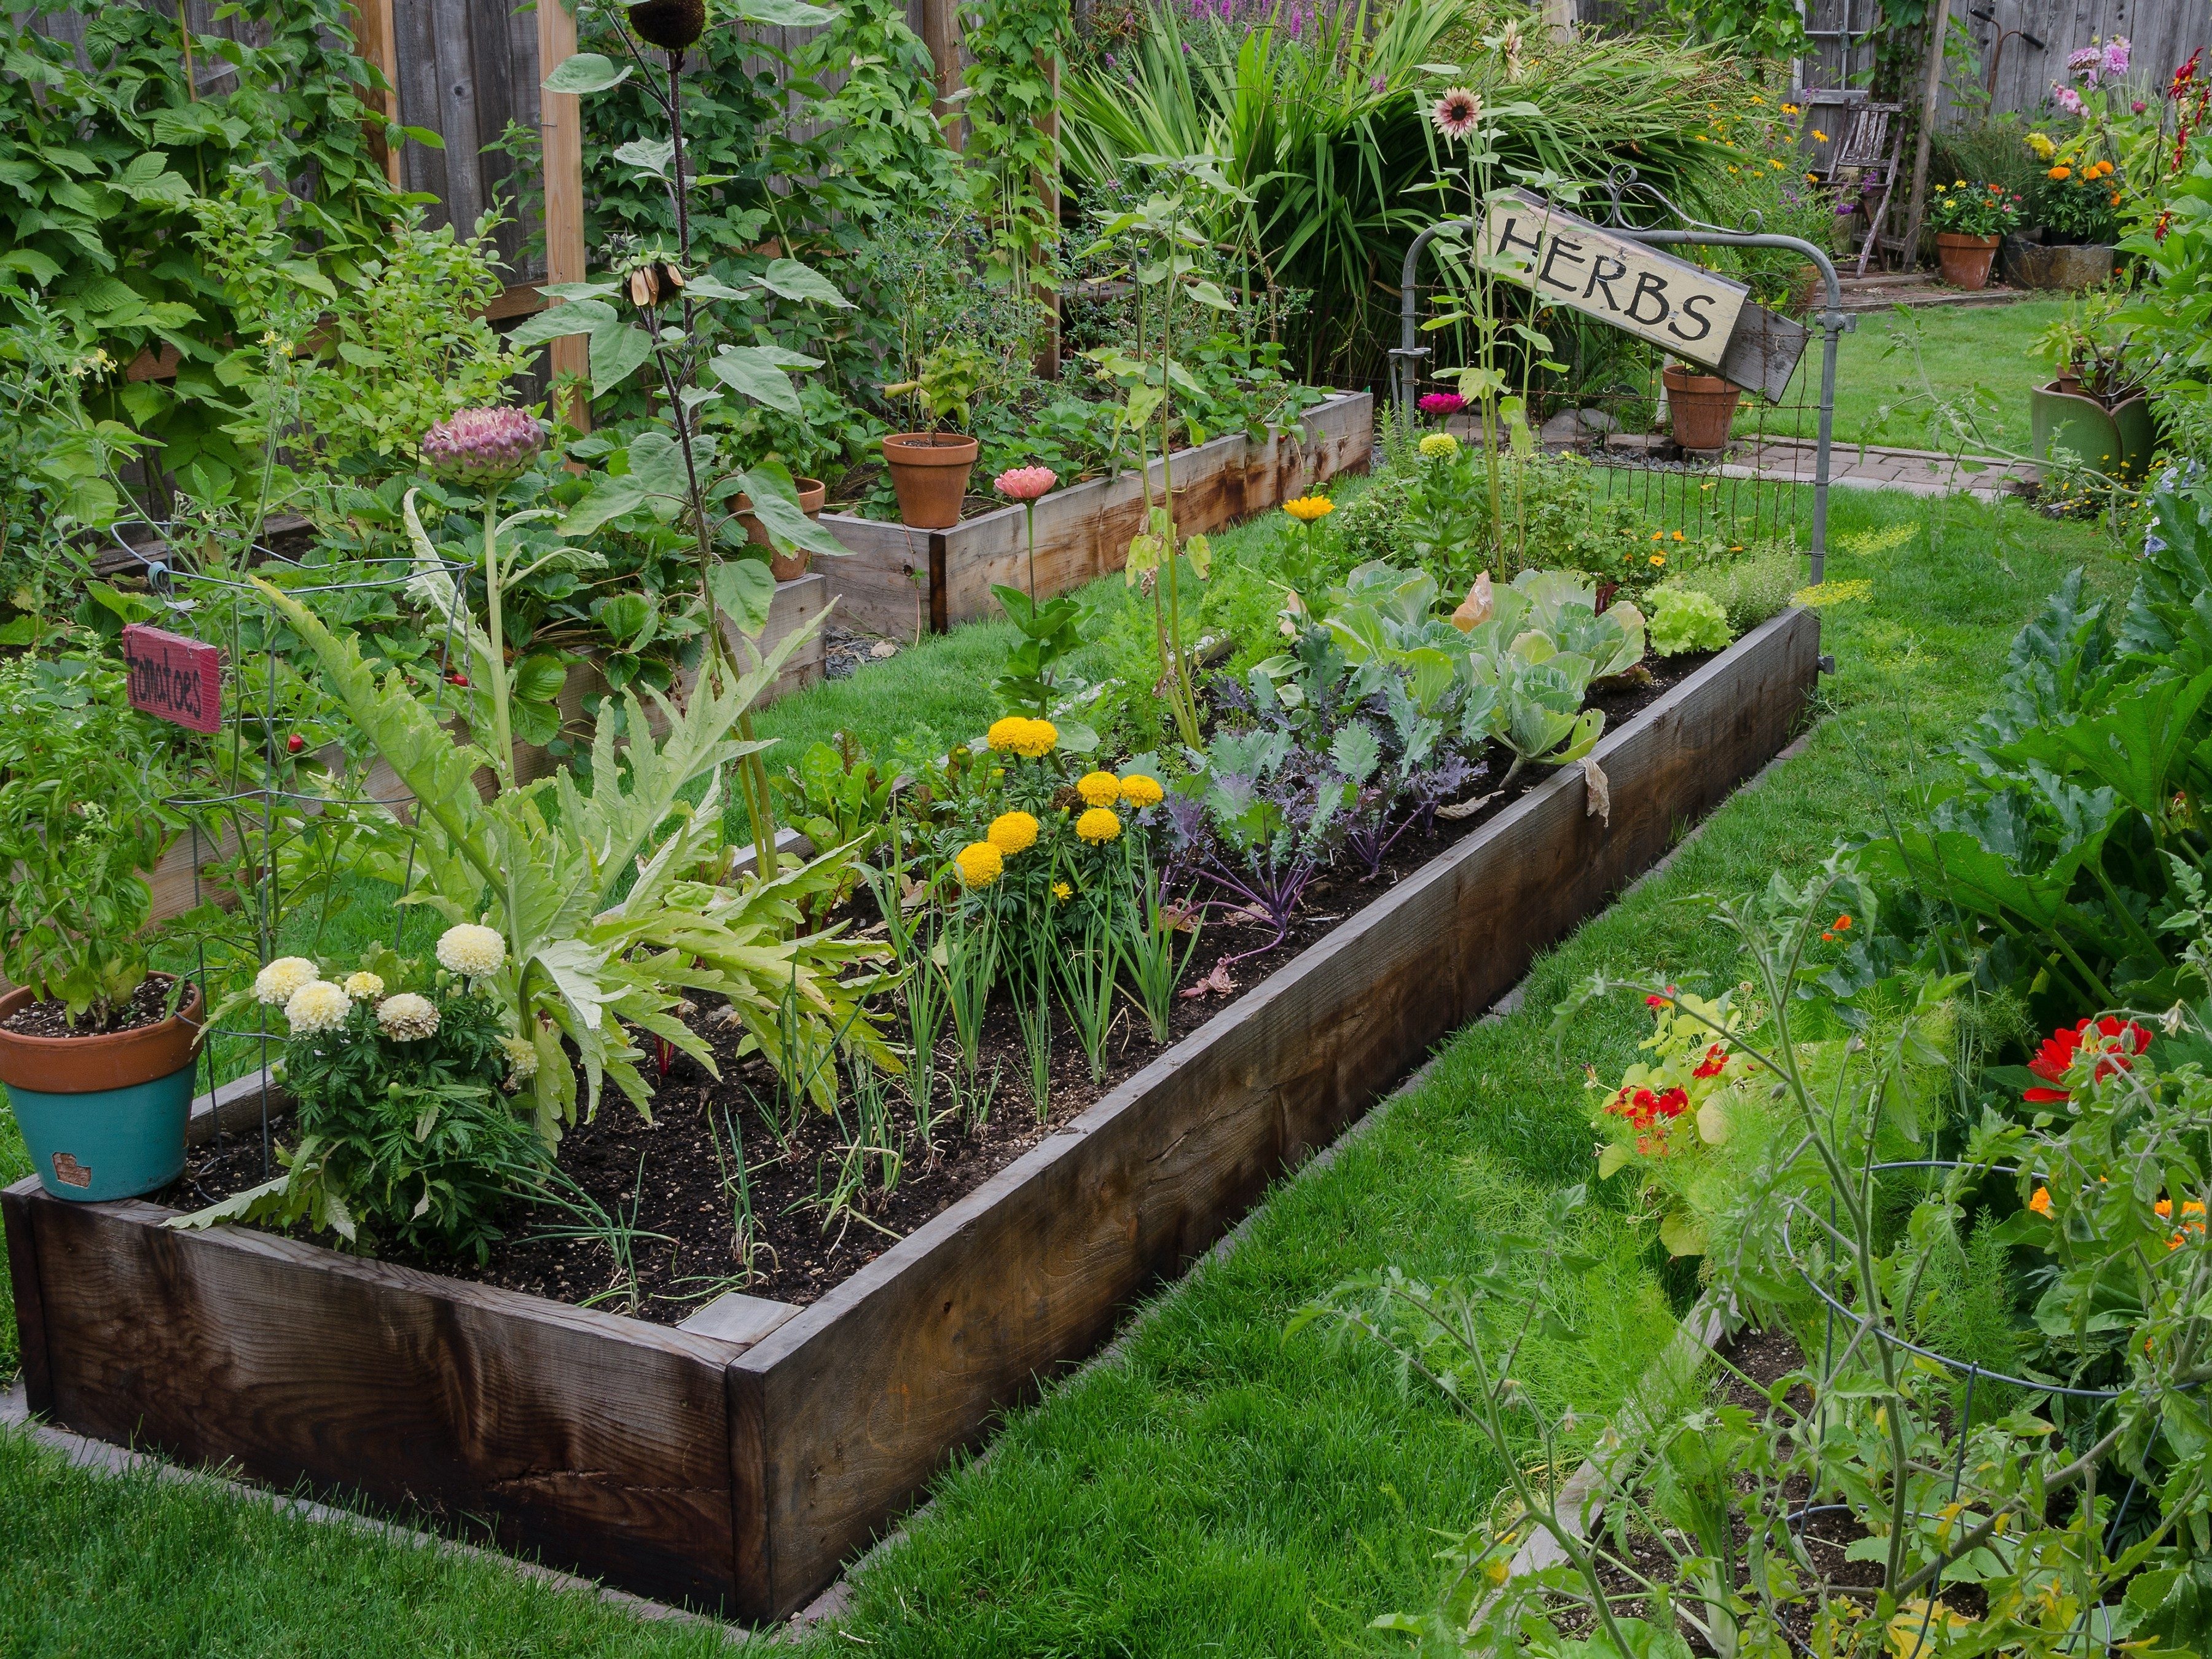 Build Raised Beds To Make Gardening Easy On Your Back 